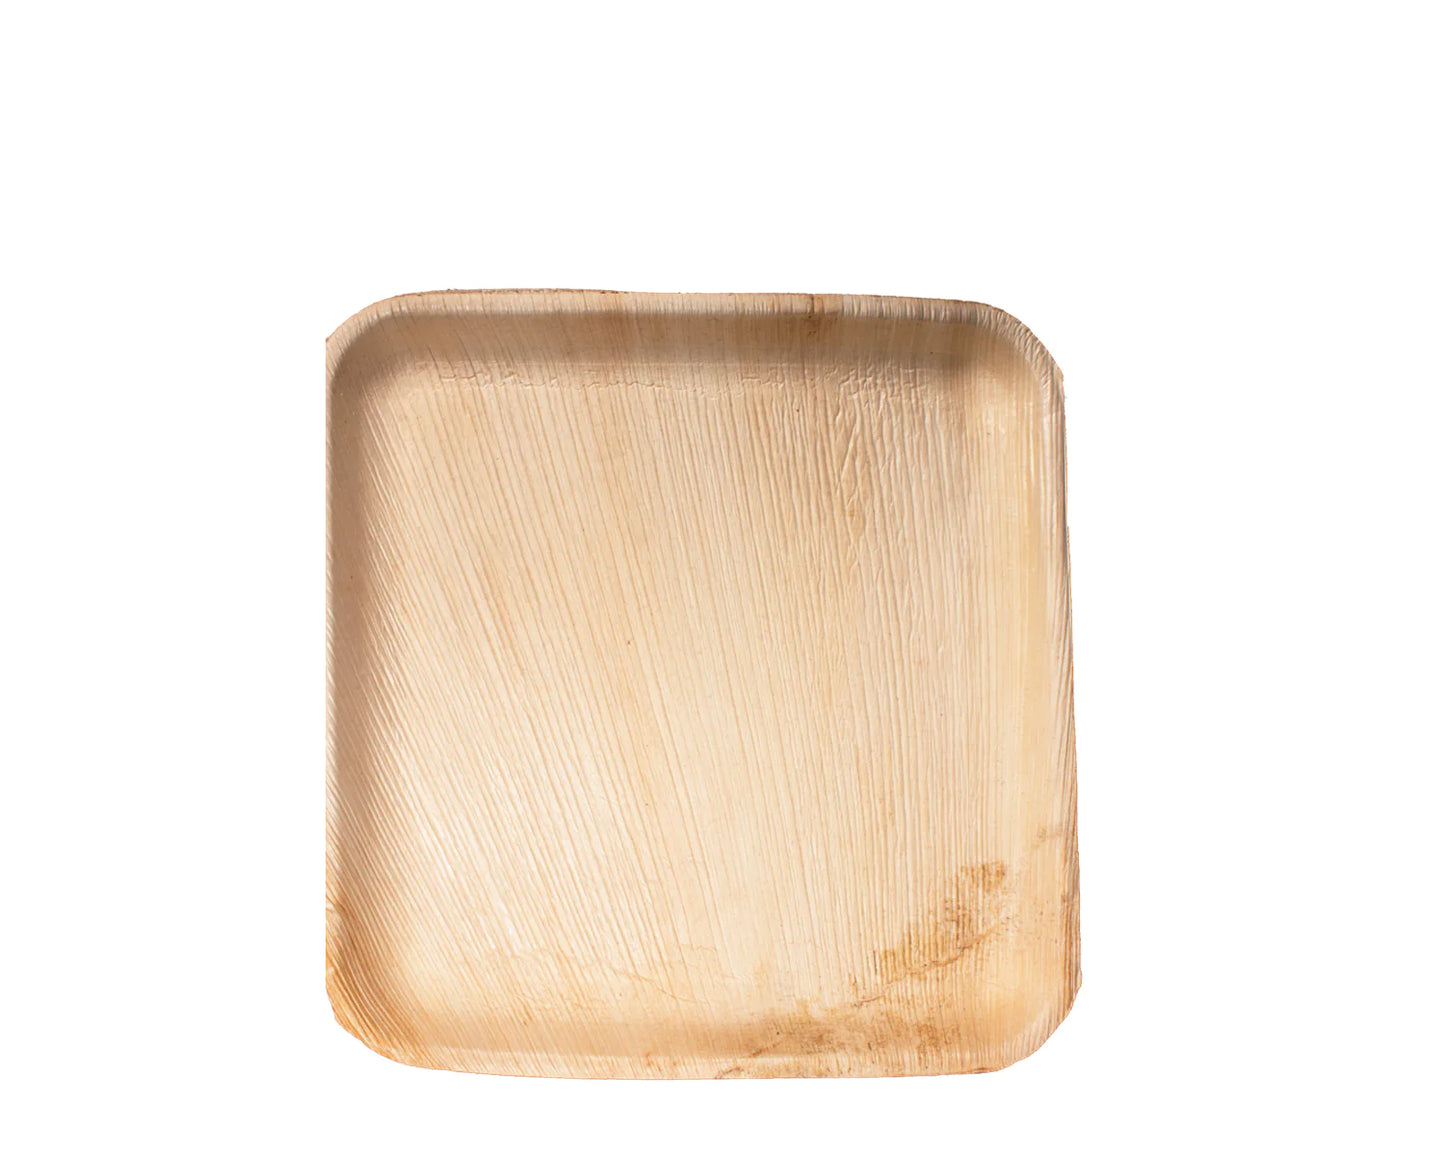 7" Square Plate | Compostable Palm Leaf